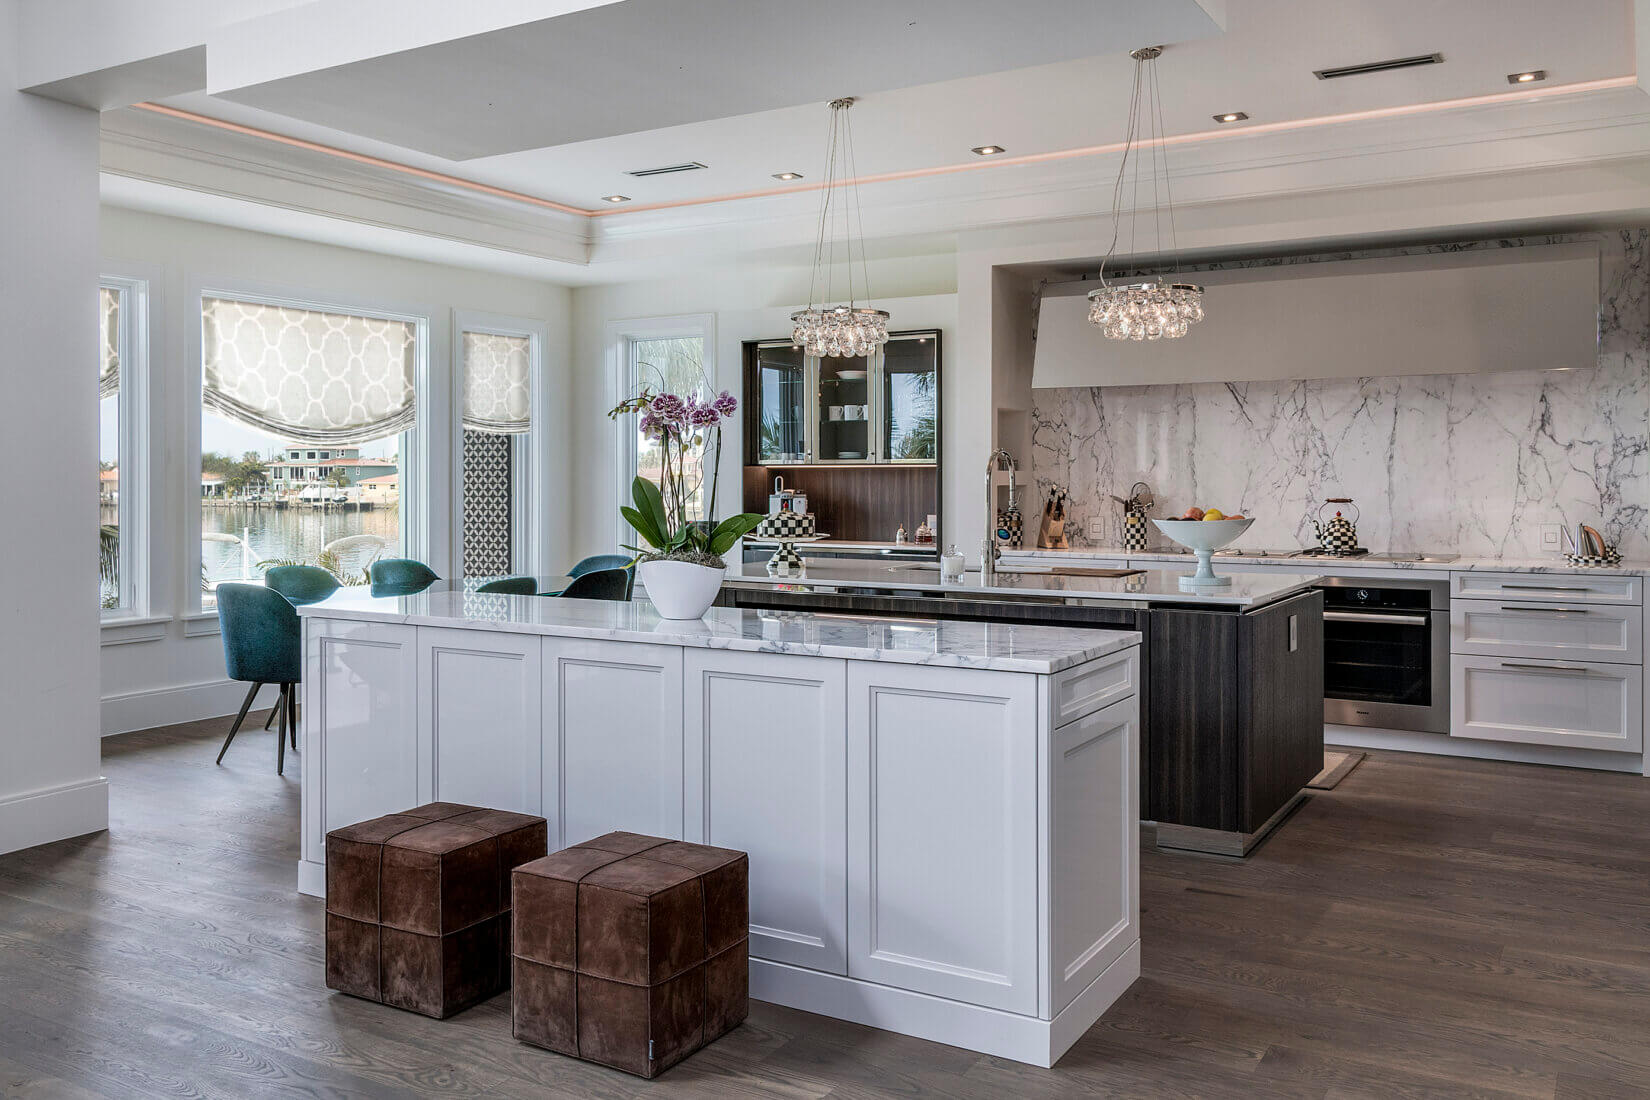 Upscale kitchen with white and dark-wood cabinetry and marble backsplash